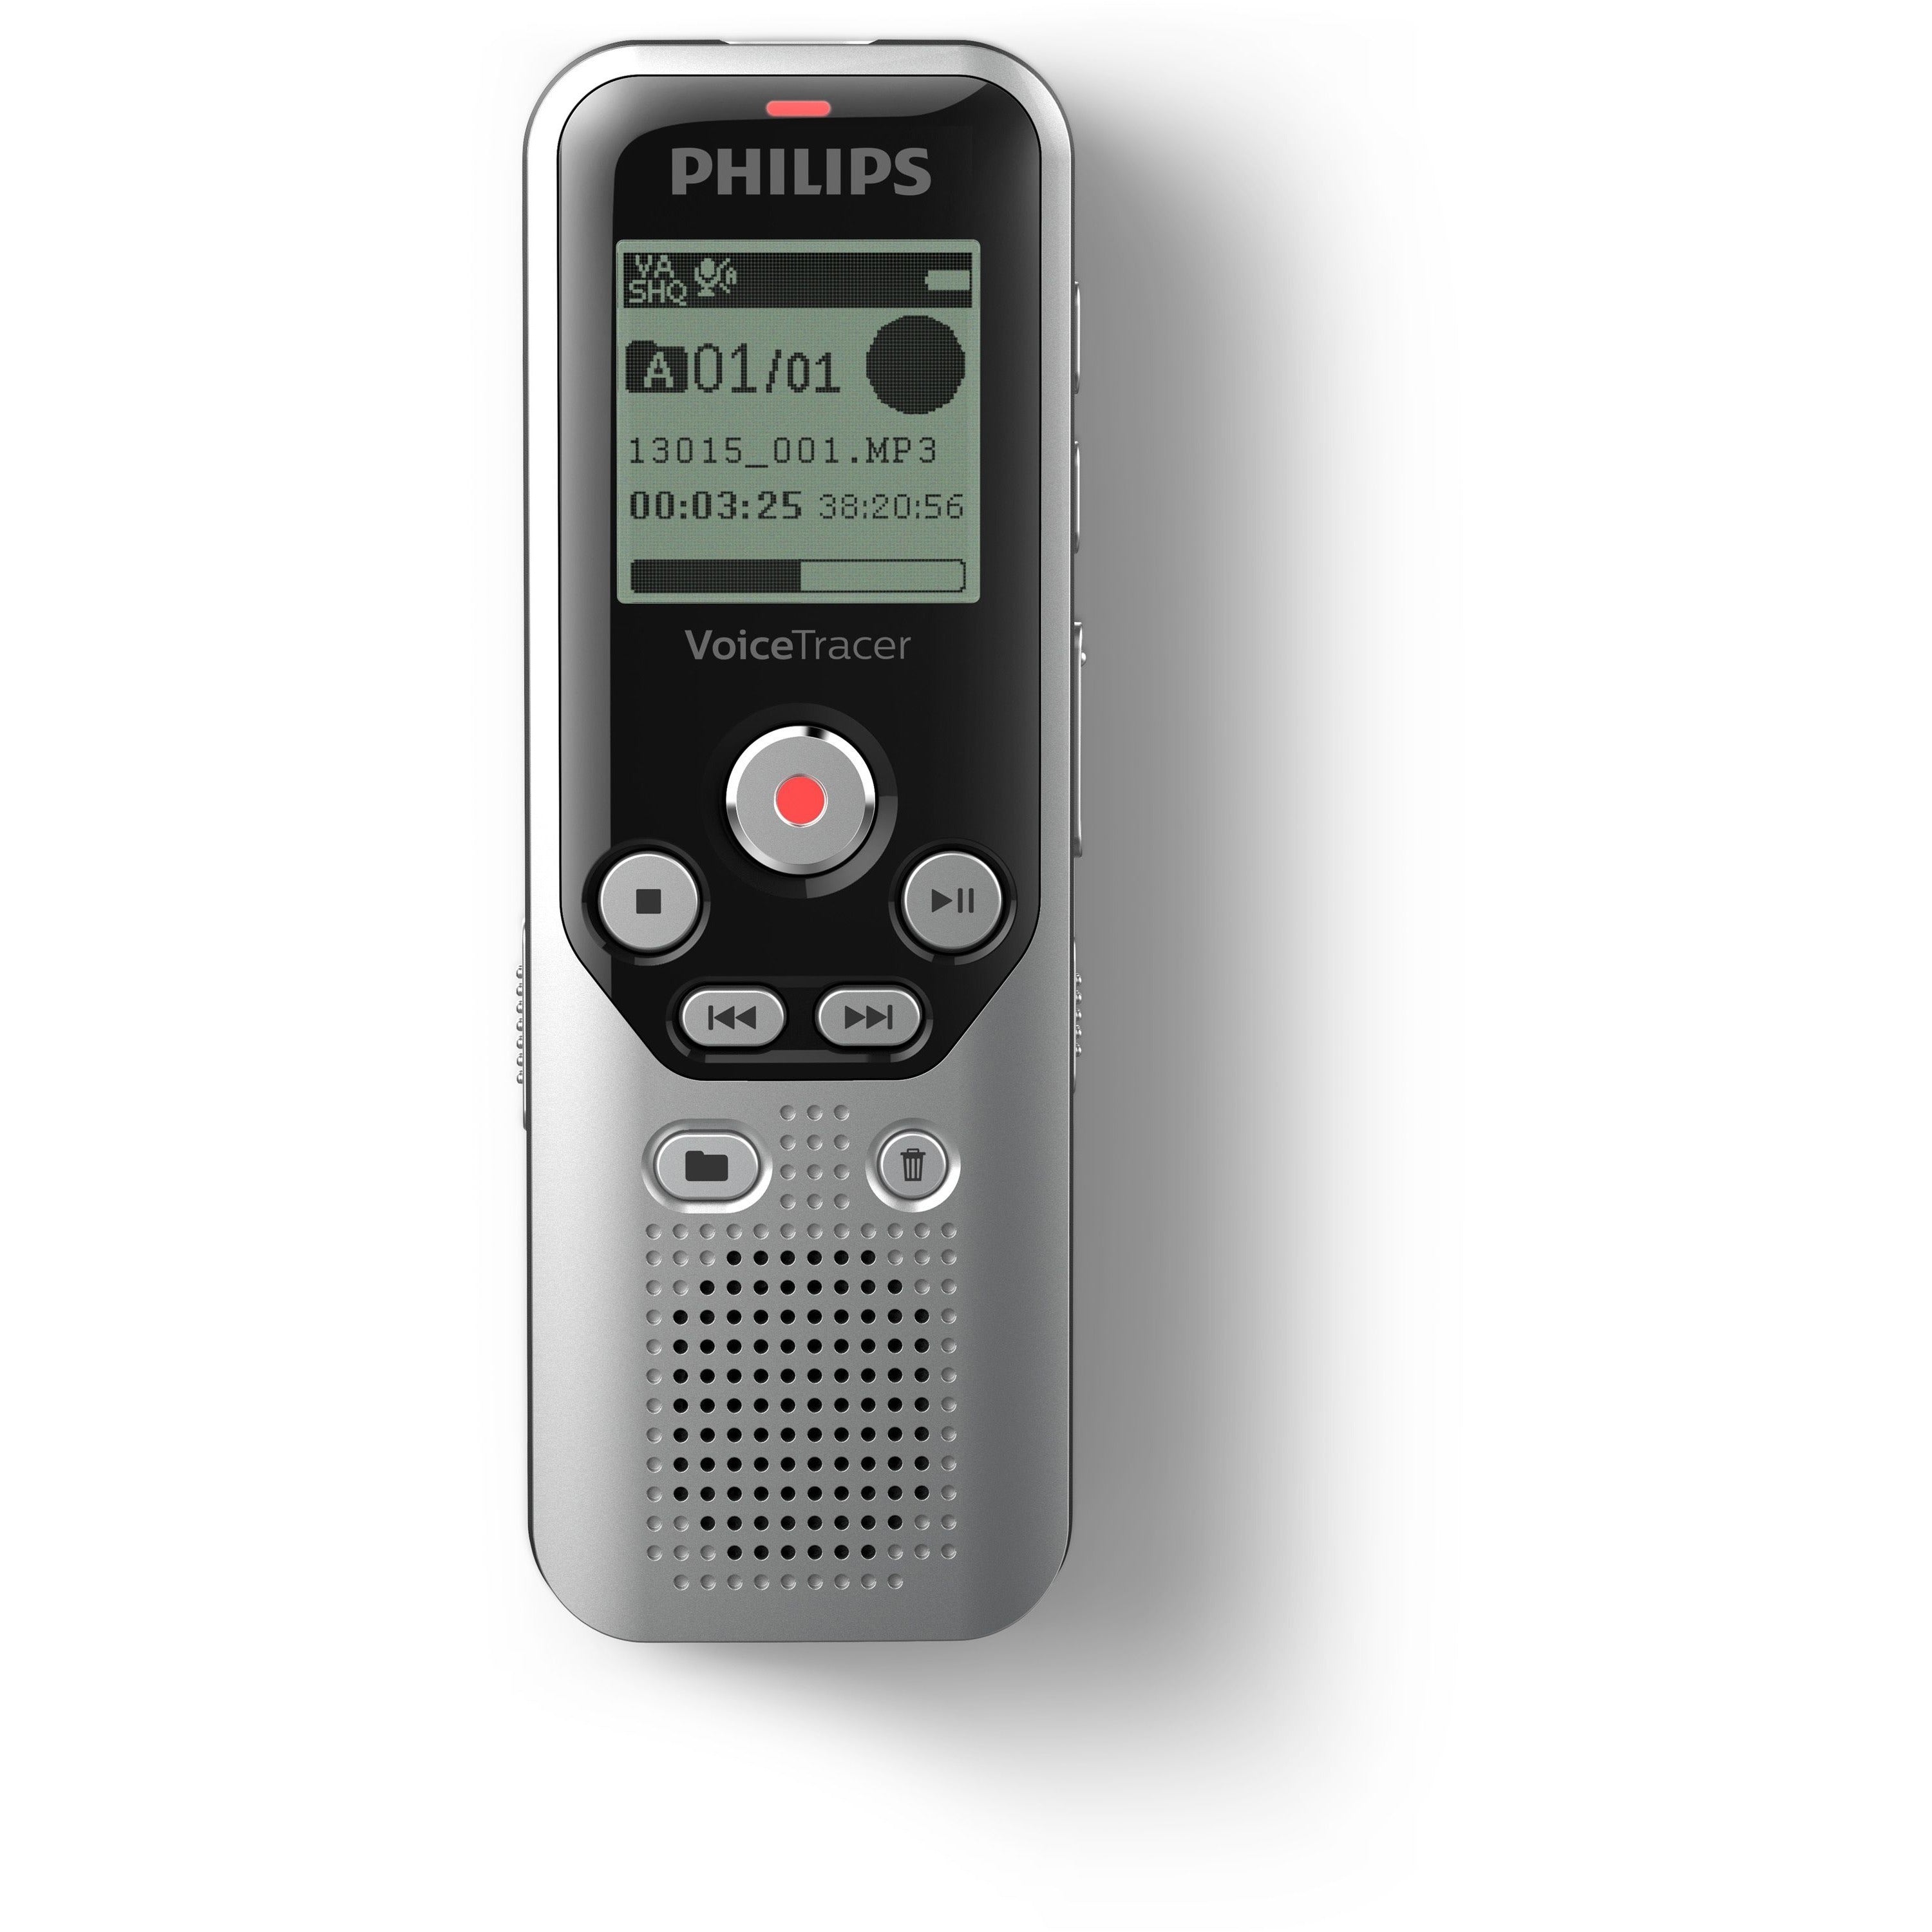 philips-voice-tracer-audio-recorder-dvt1250-8-gbmicrosd-sd-supported-13-lcd-wav-headphone-583-hourspeacerecording-time-portable_pspdvt1250 - 2